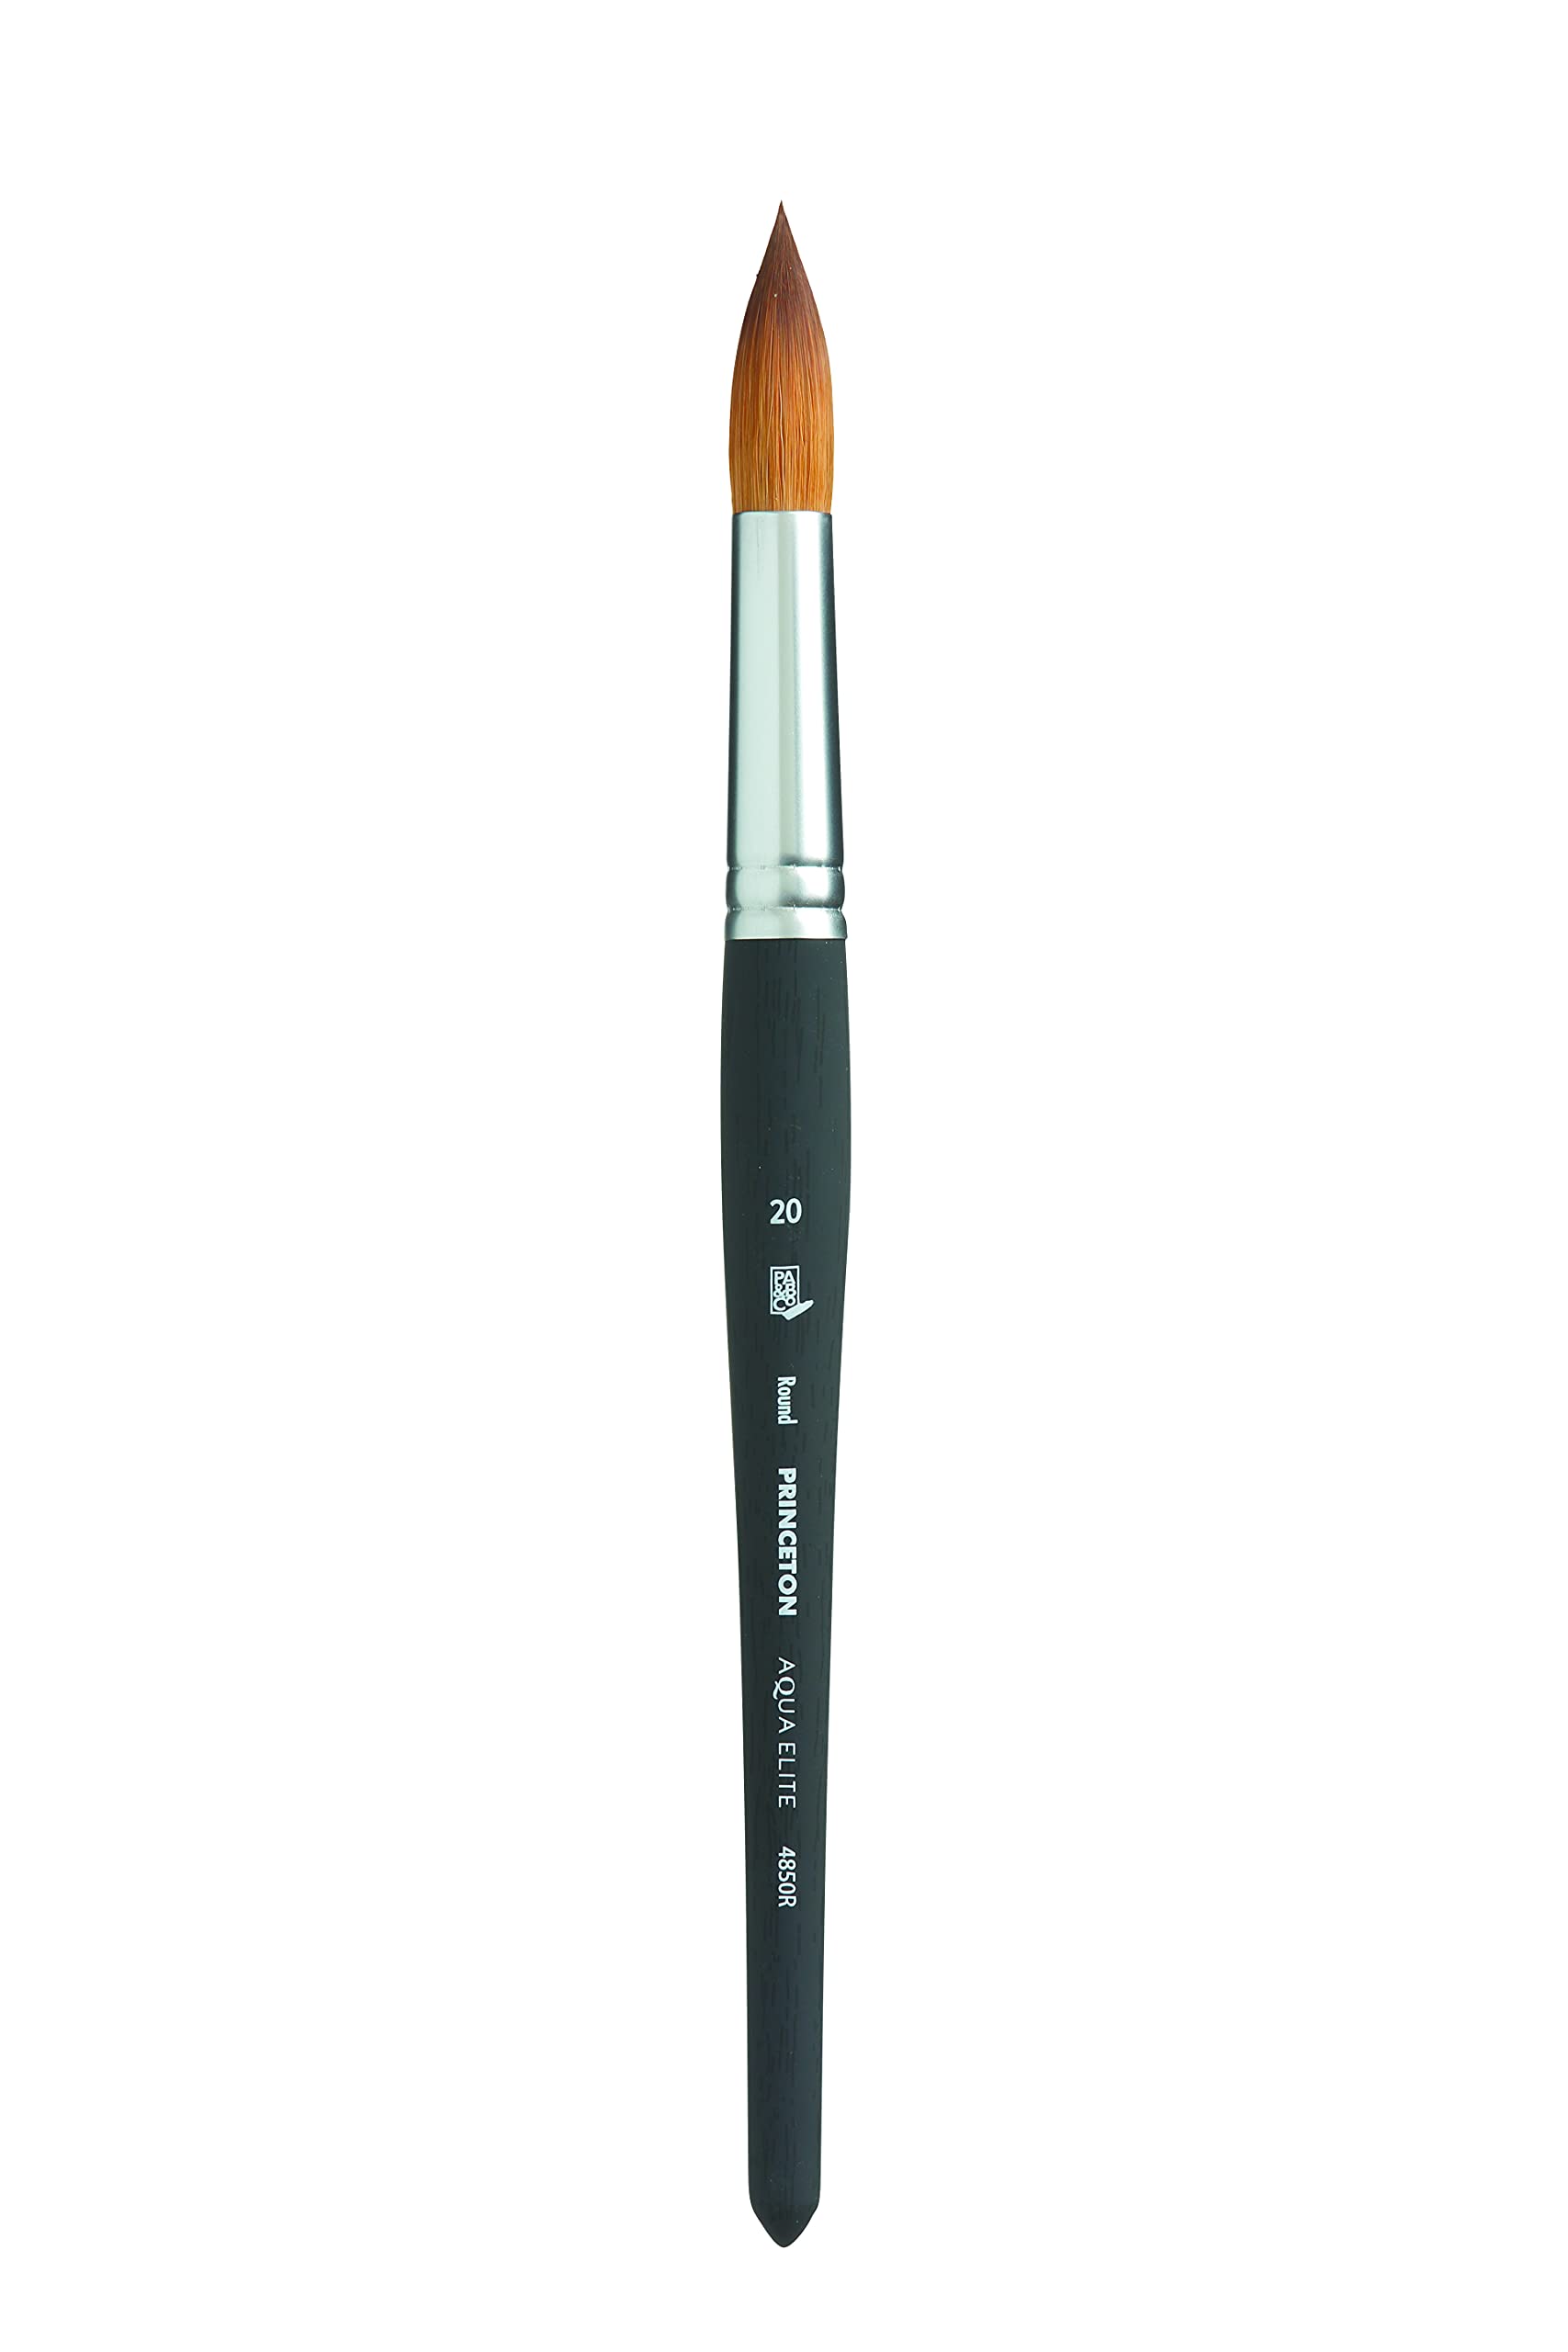 Princeton Aqua Elite 4850 series - High quality artists paint, watercolor,  speciality brushes